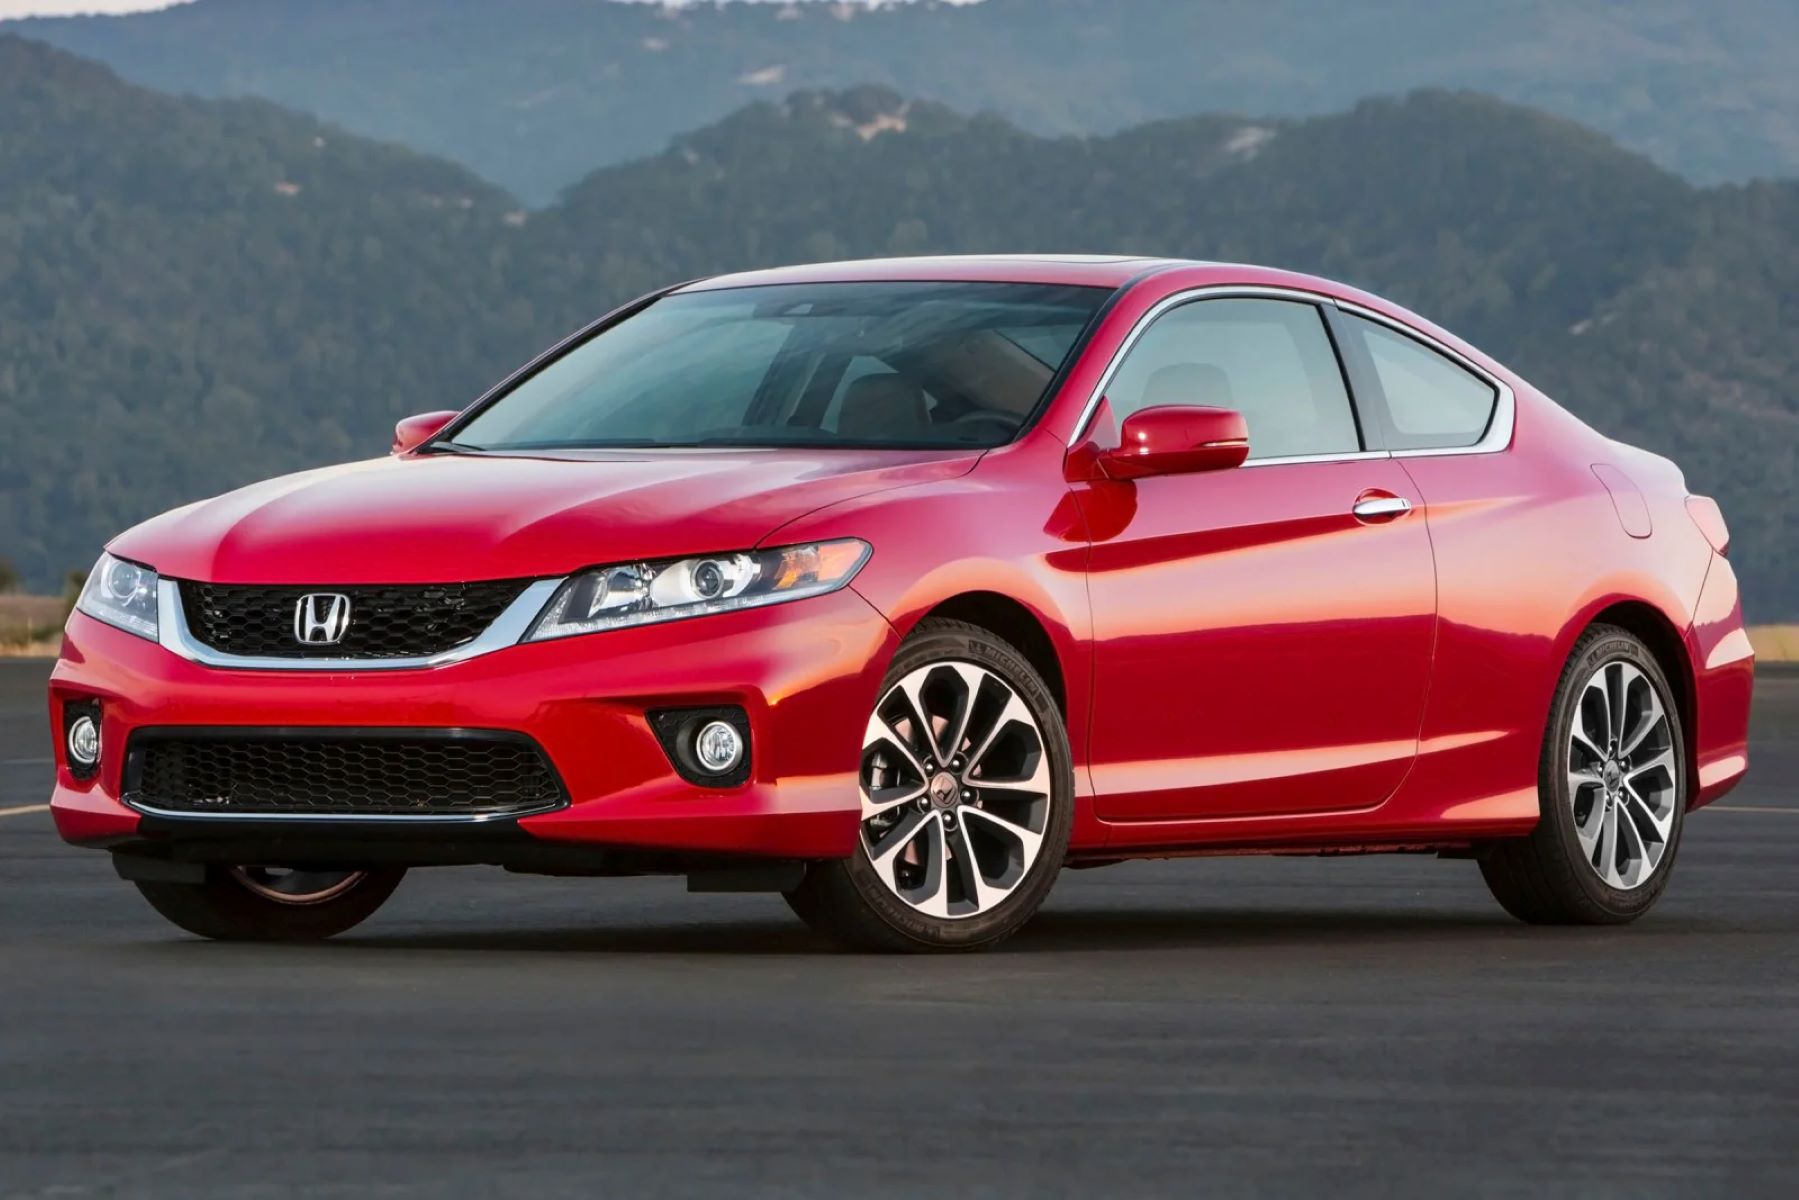 Top Choice For First Car: 2013-2015 Honda Accord With Over 100k Miles - Perfect For College Students!